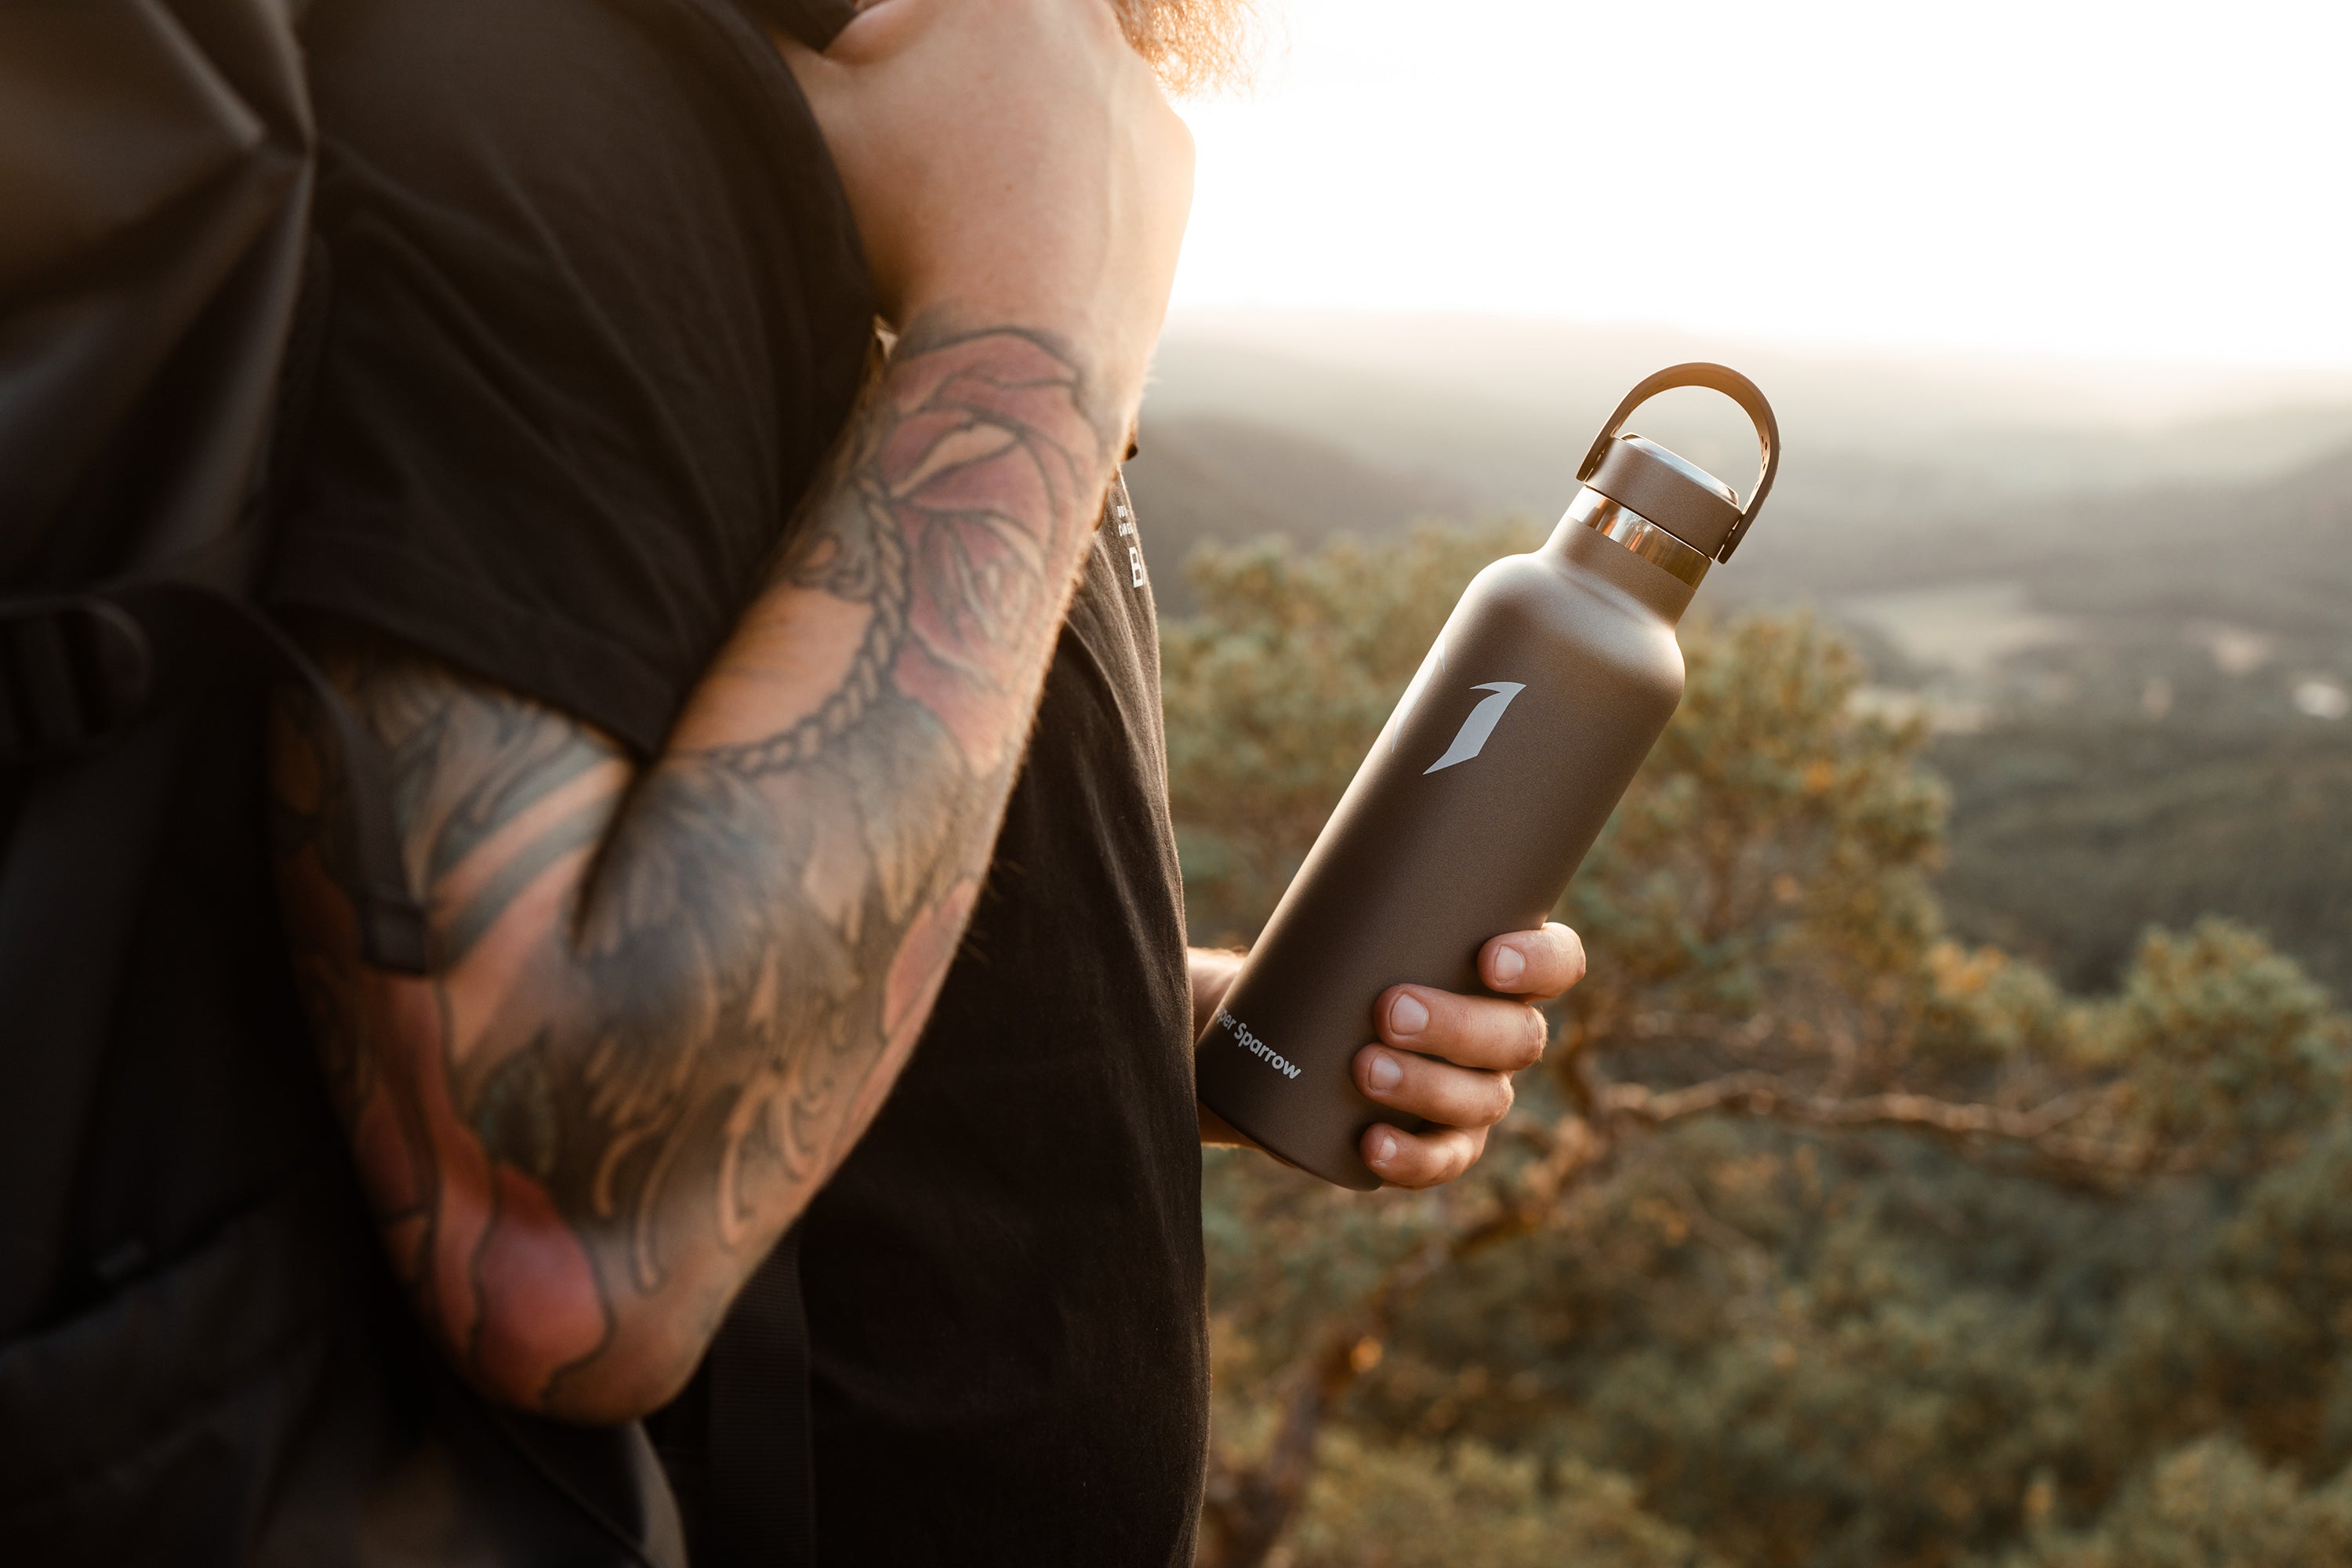  Super Sparrow Sports Water Bottle - 350ml & 500ml & 750ml &  1000ml - Non-Toxic BPA Free & Eco-Friendly Tritan Co-Polyester Plastic -  For Running, Gym, Yoga, Outdoors and Camping 